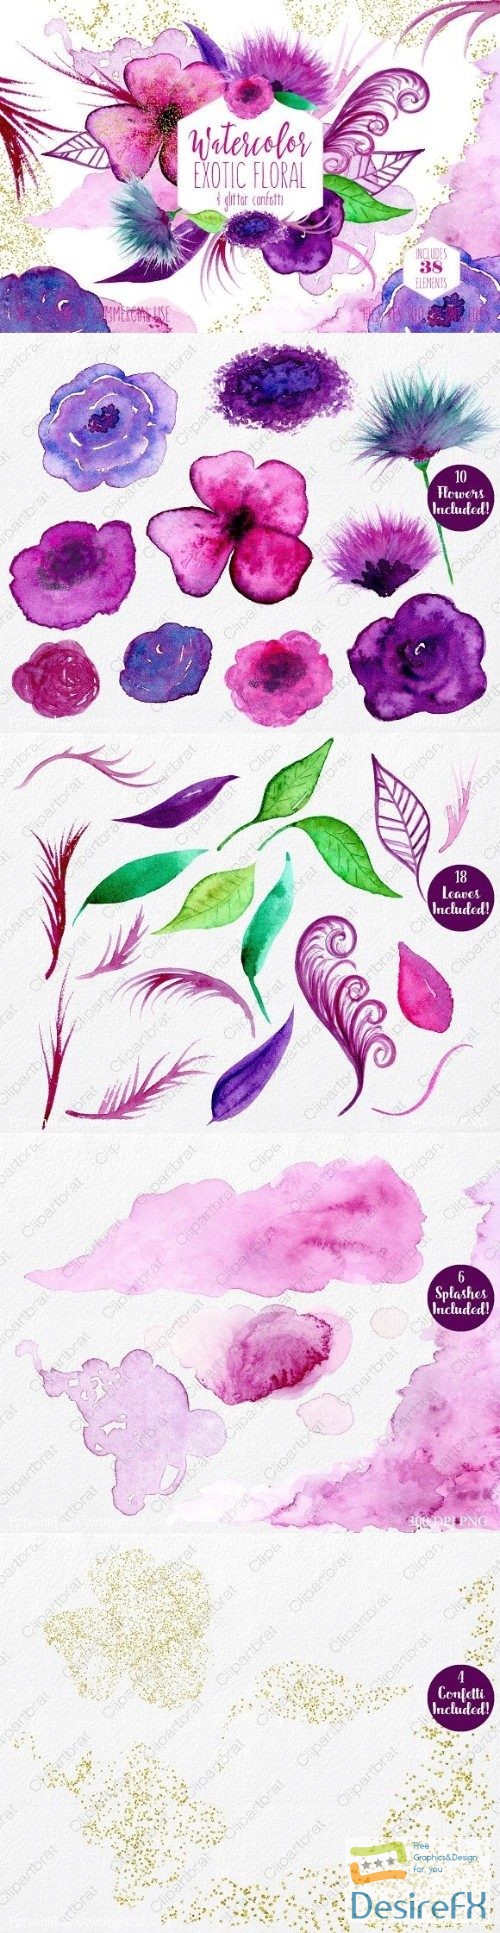 CreativeMarket - Exotic Florals & Feathers 2180680